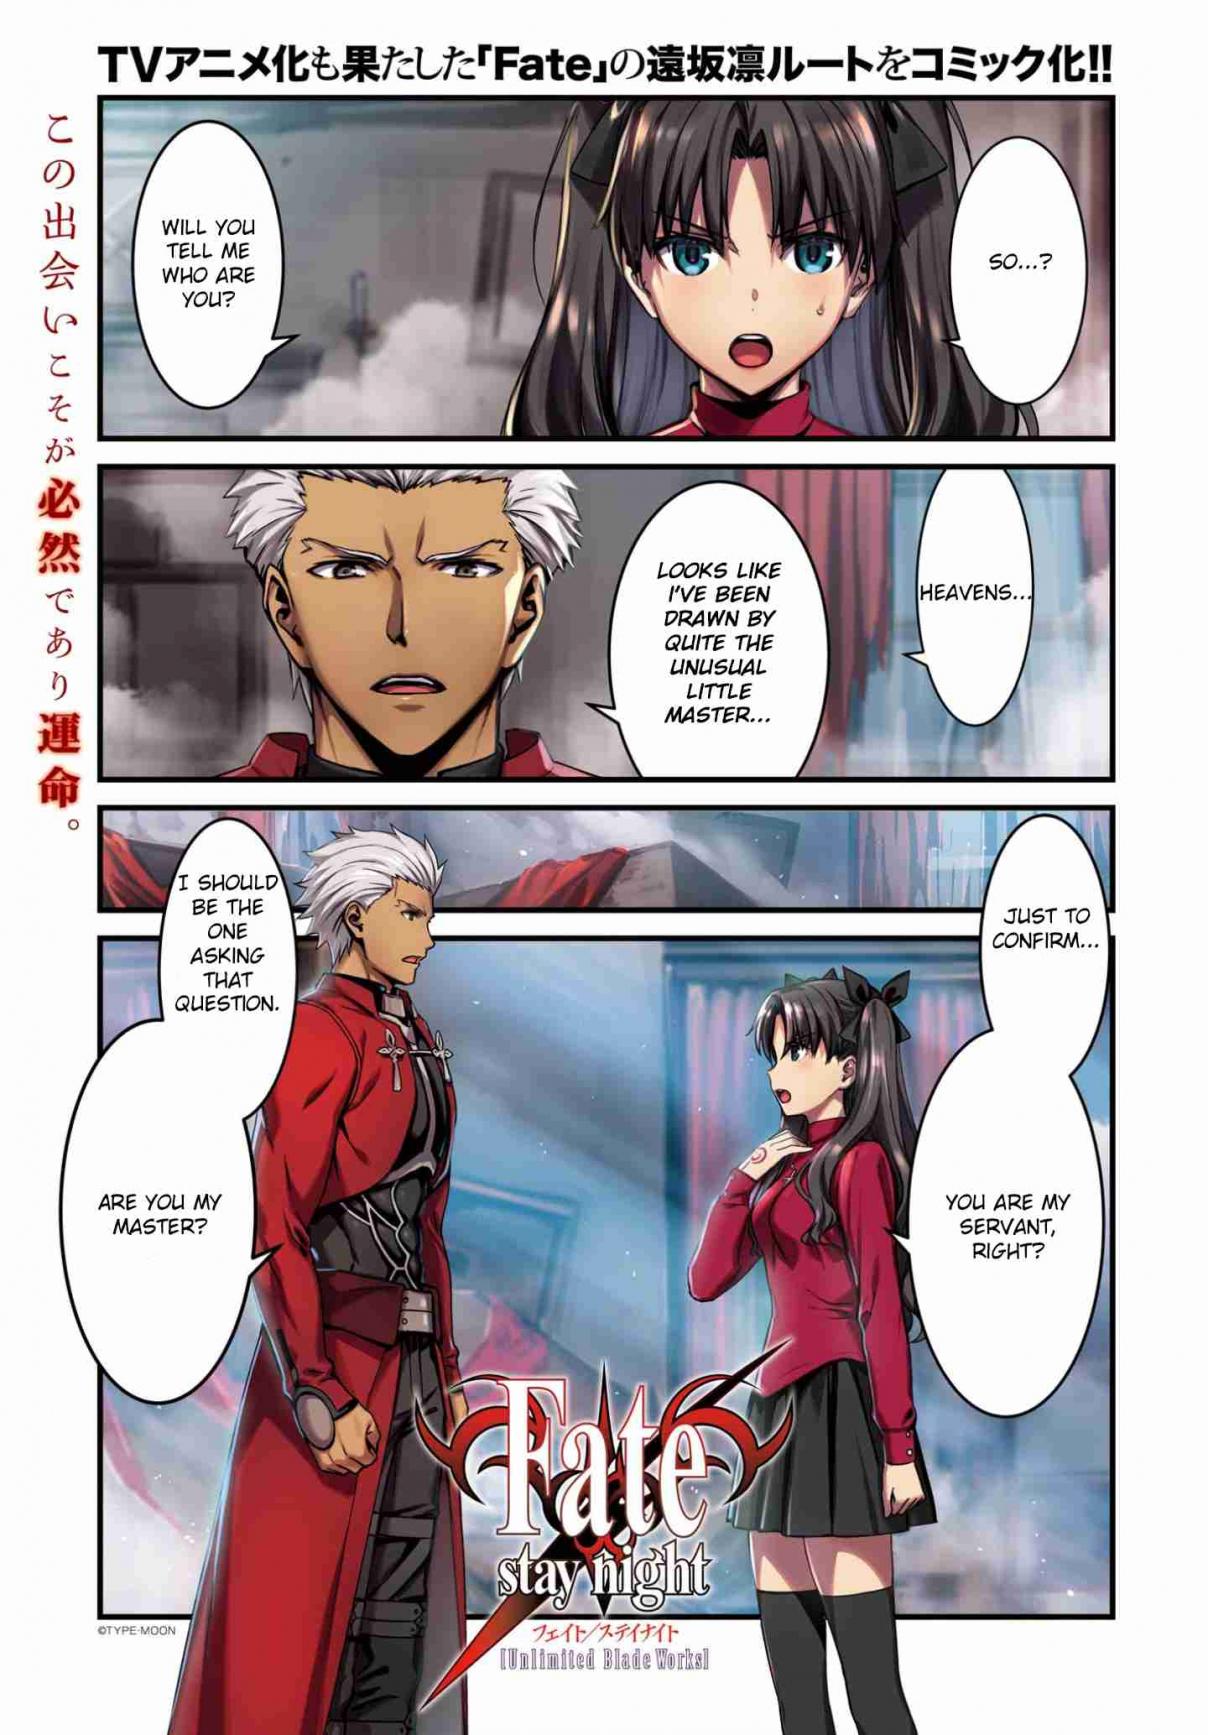 Fate/Stay Night - Unlimited Blade Works 1